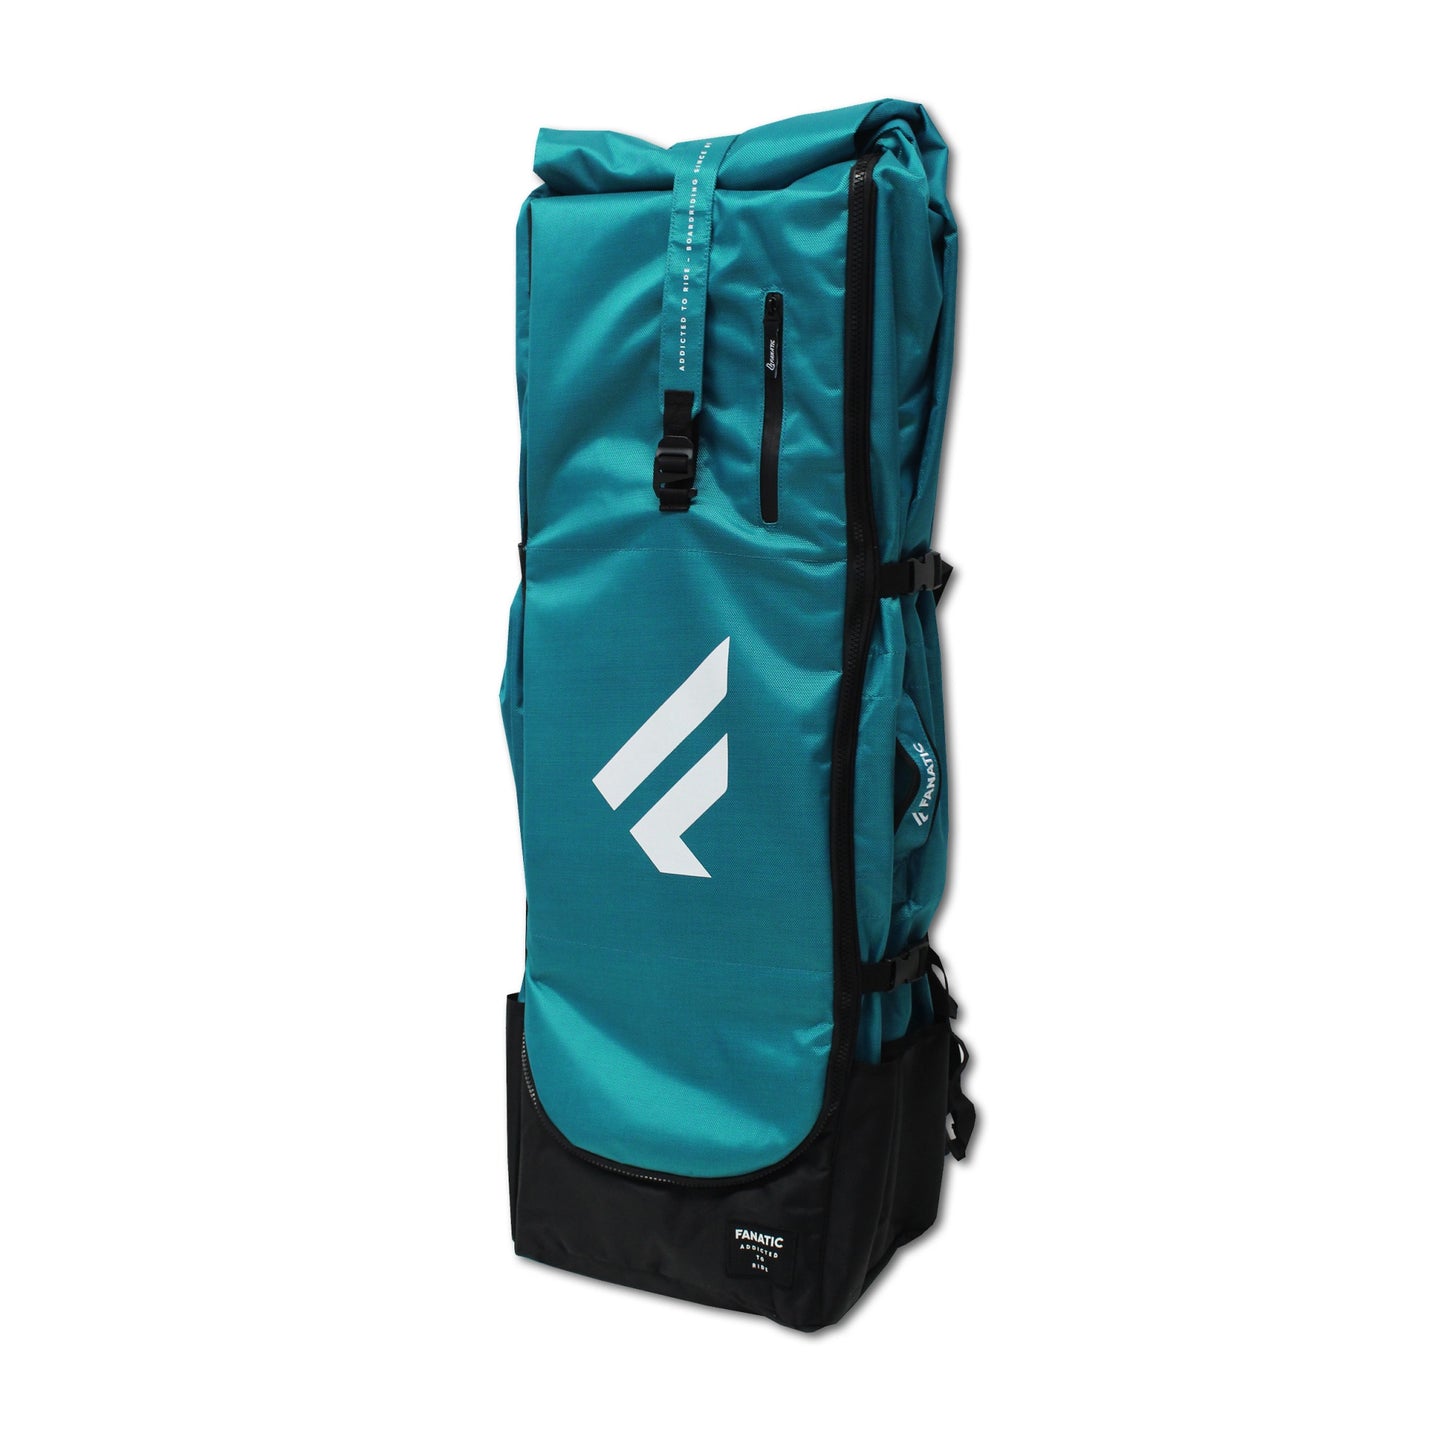 Fanatic Gearbag for Pocket iSUP – SUP Tasche